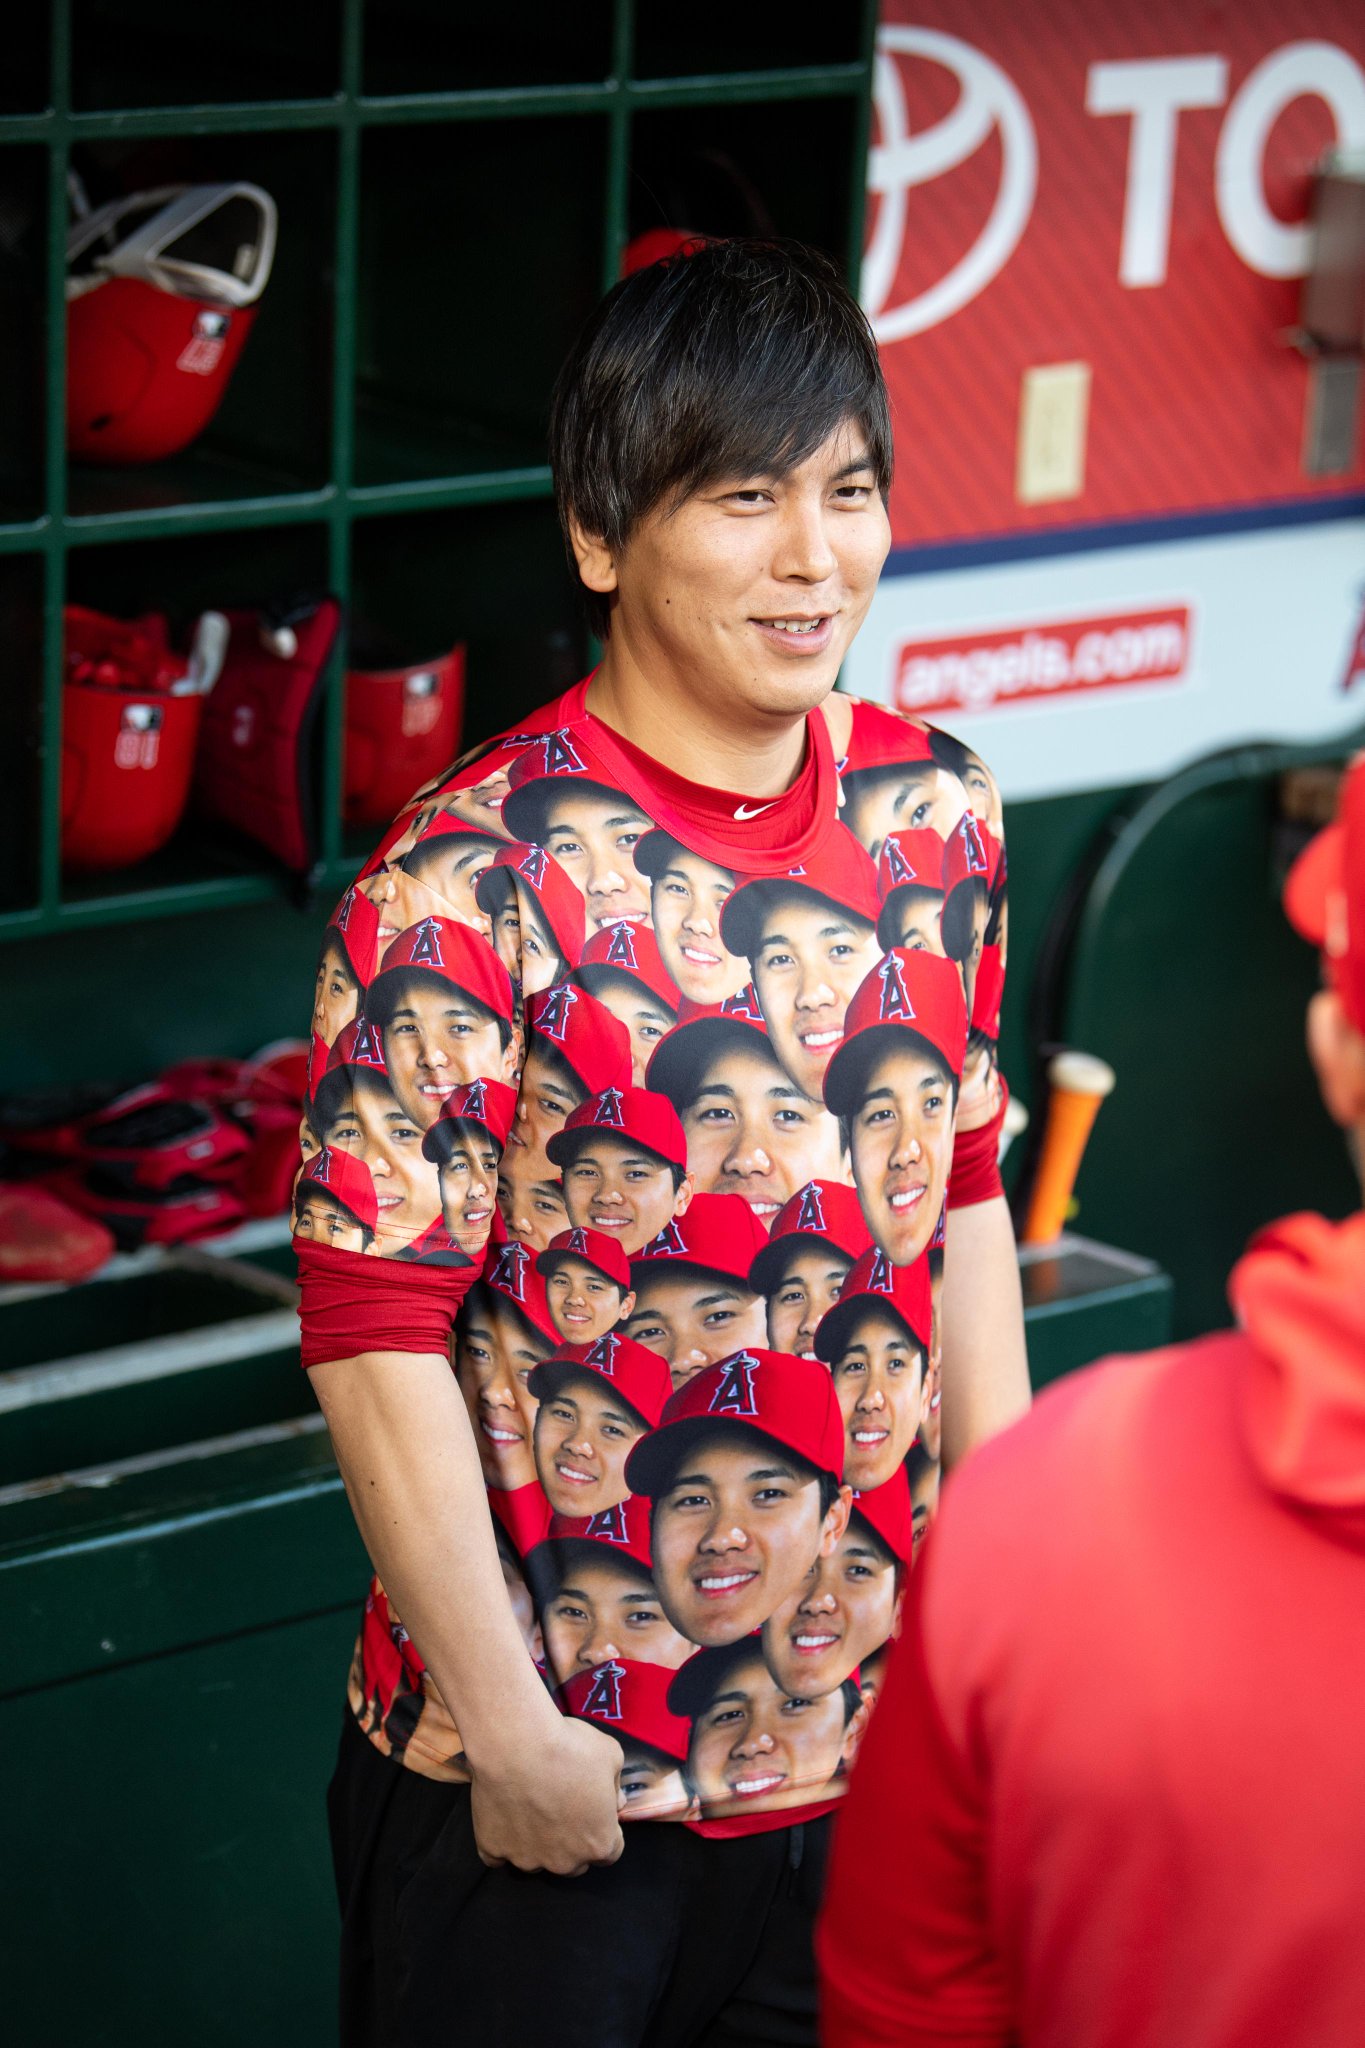 Los Angeles Angels on X: Let's 𝙛𝙖𝙘𝙚 it, this is the moment fashion was  born. The first 30,000 fans in attendance on Tuesday, September 24th will  receive this Ippei-approved Ohtani Shirt, presented